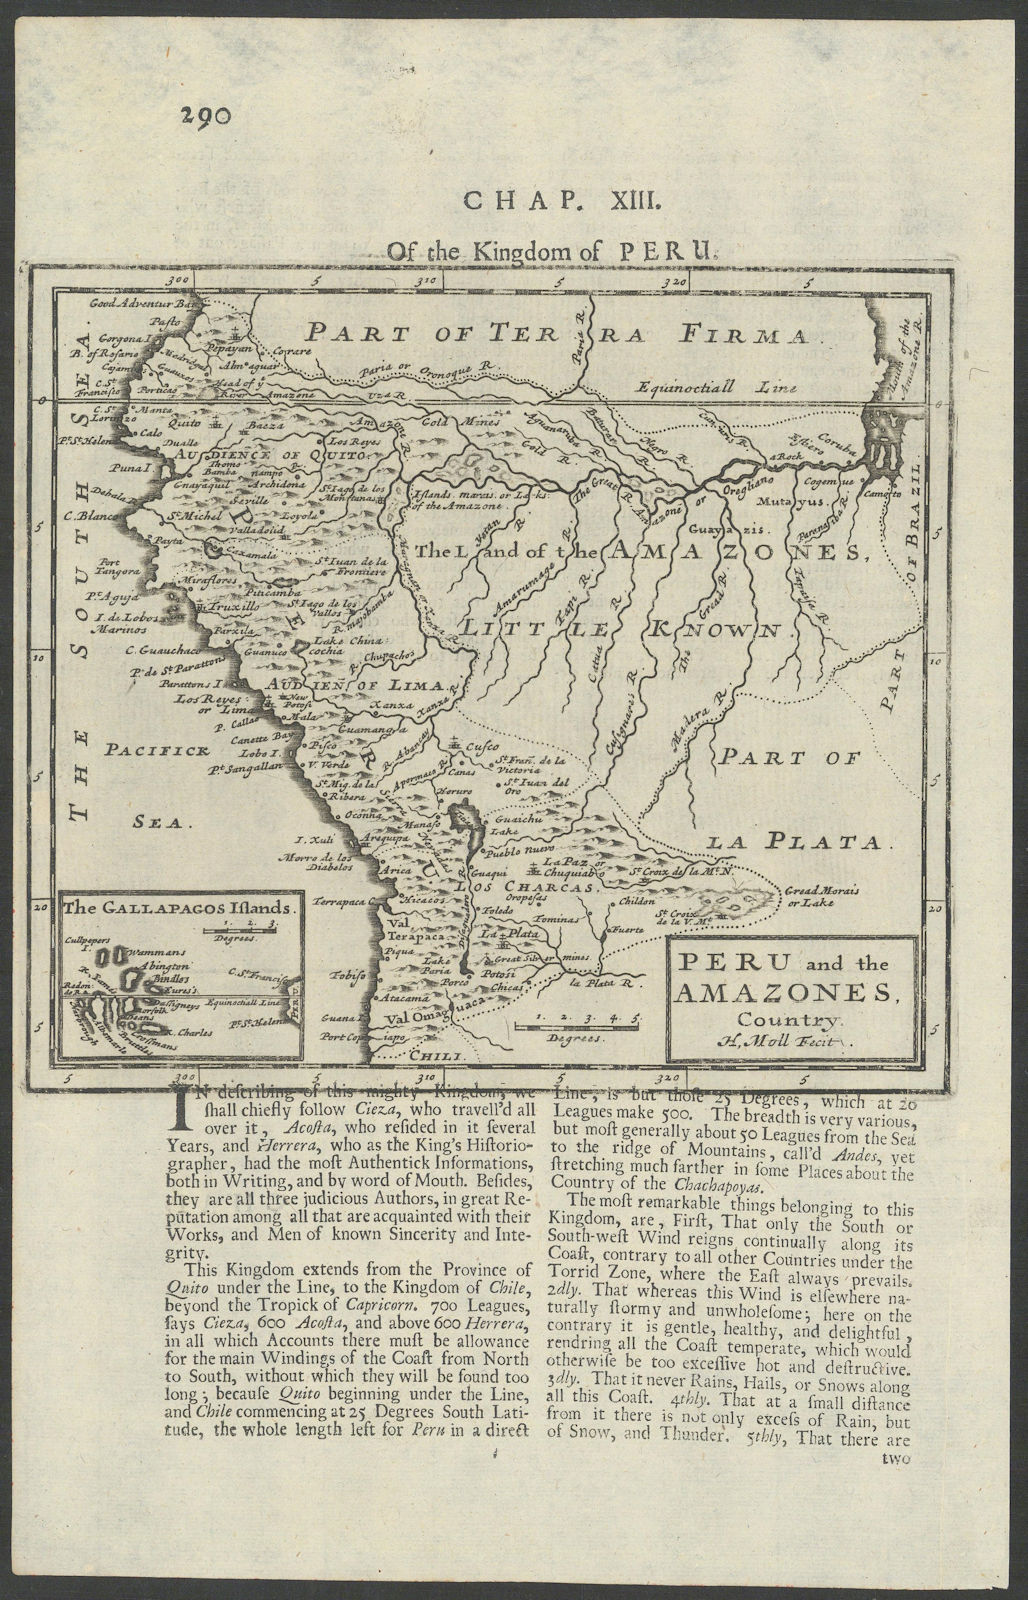 Associate Product Peru and the Amazones Country by Herman Moll. Ecuador Amazonia Bolivia 1709 map